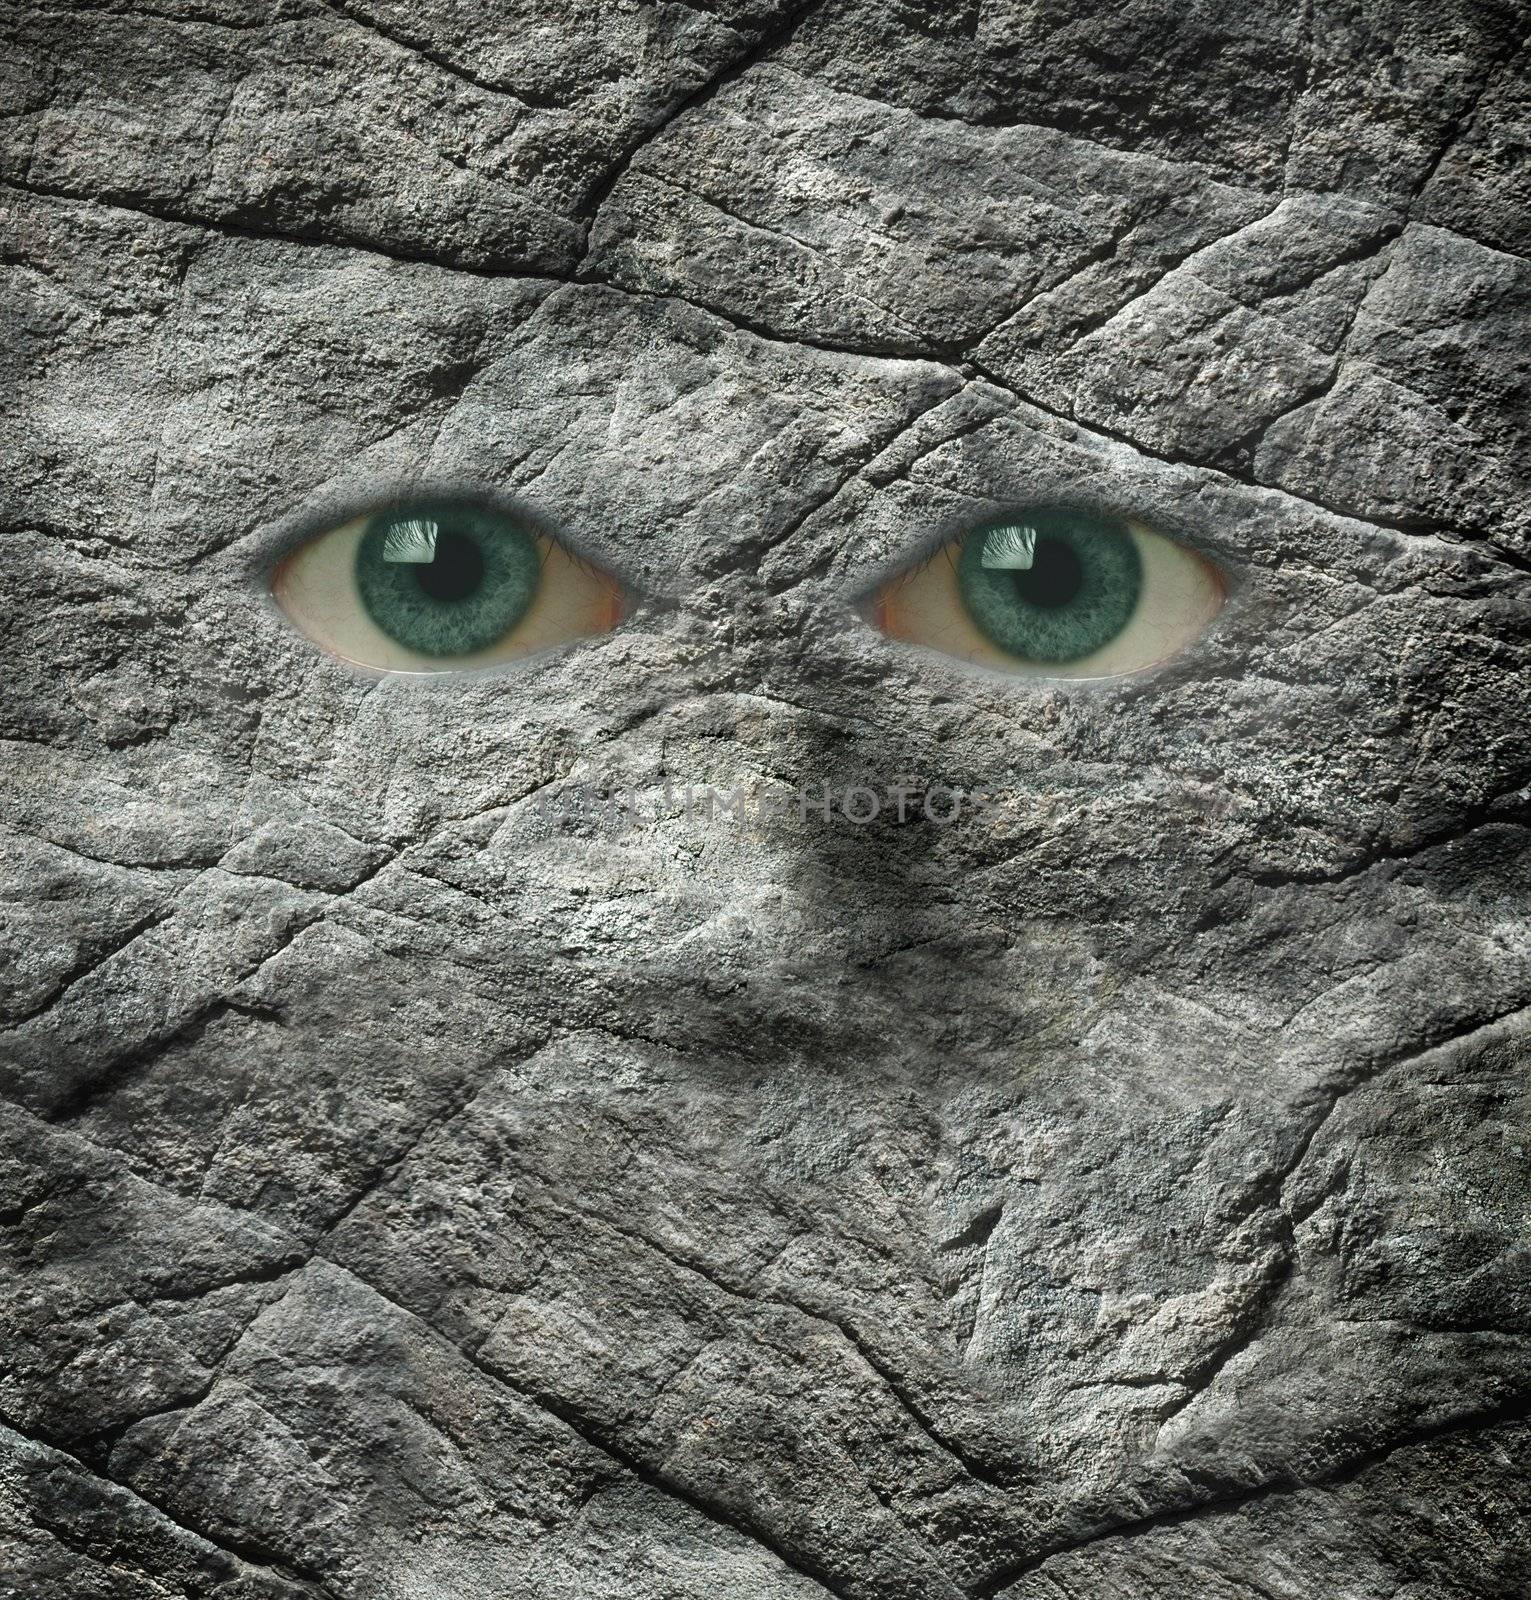 A face made of rock and human eyes